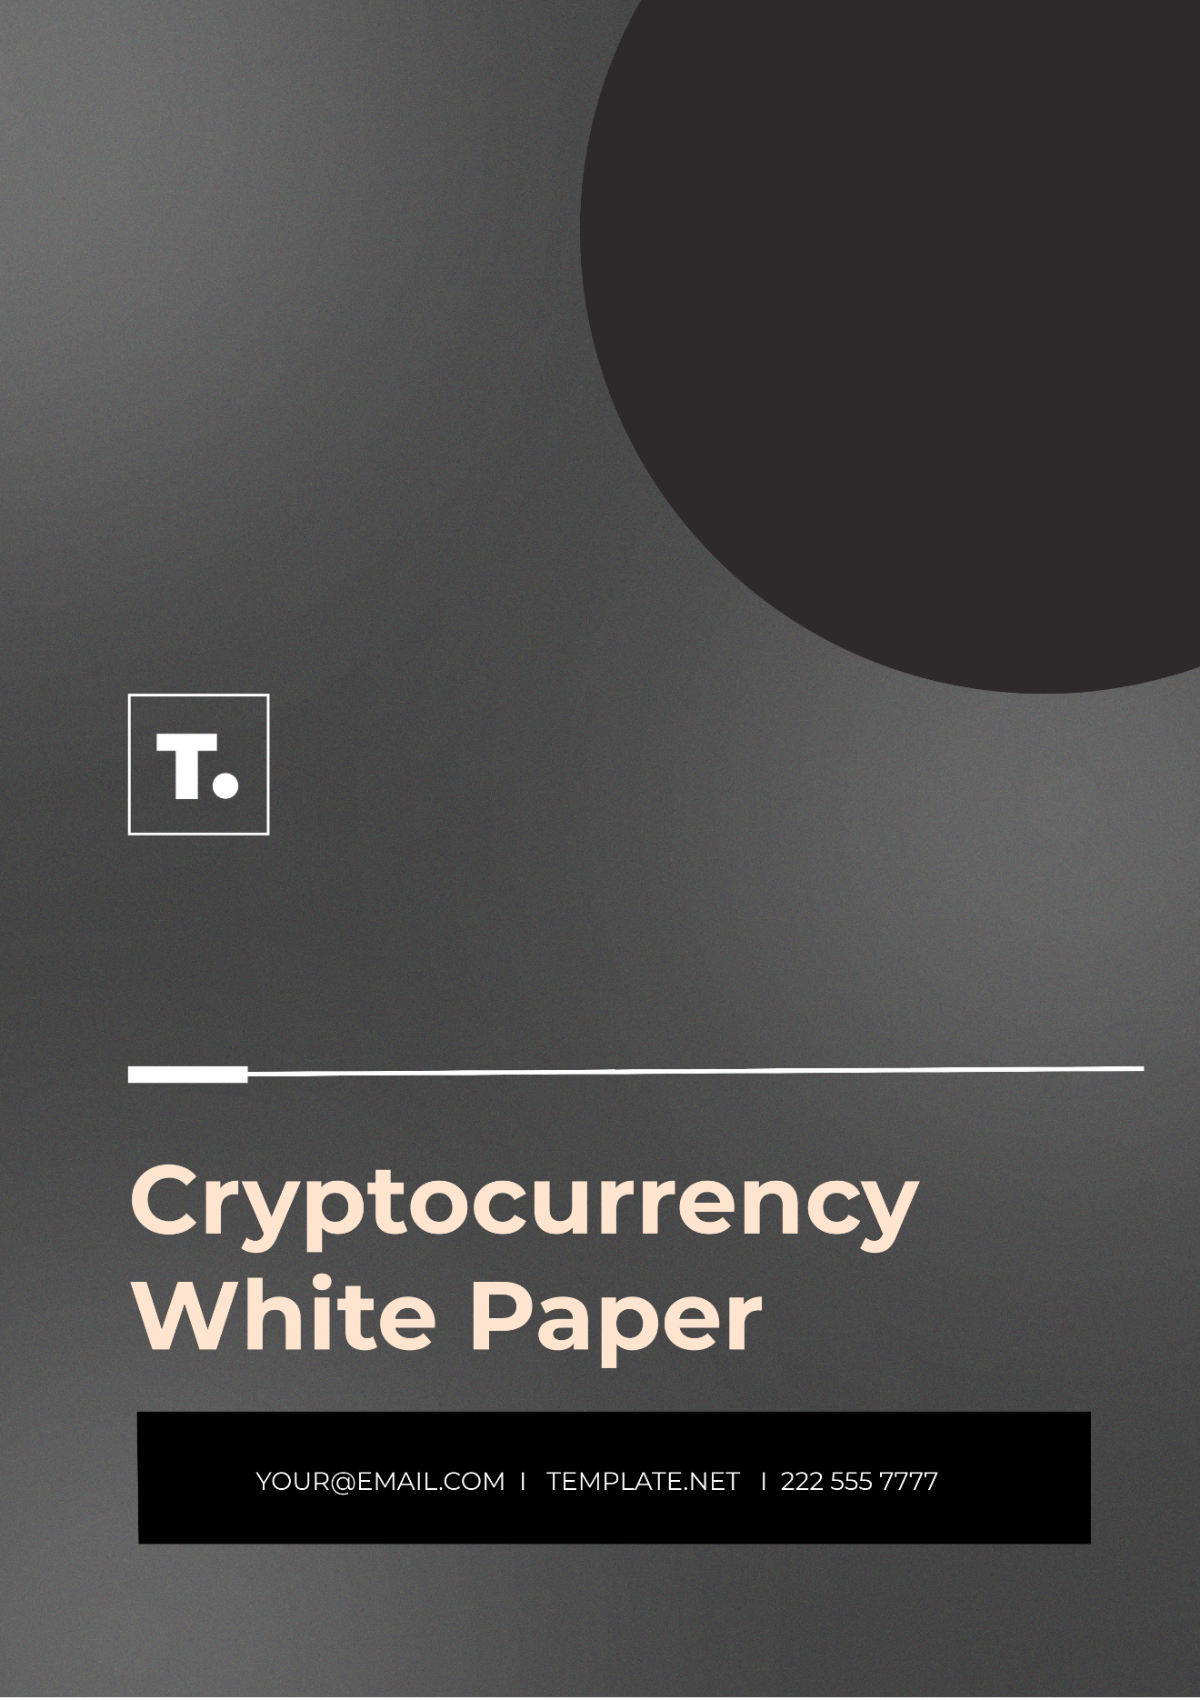 Cryptocurrency White Paper Template